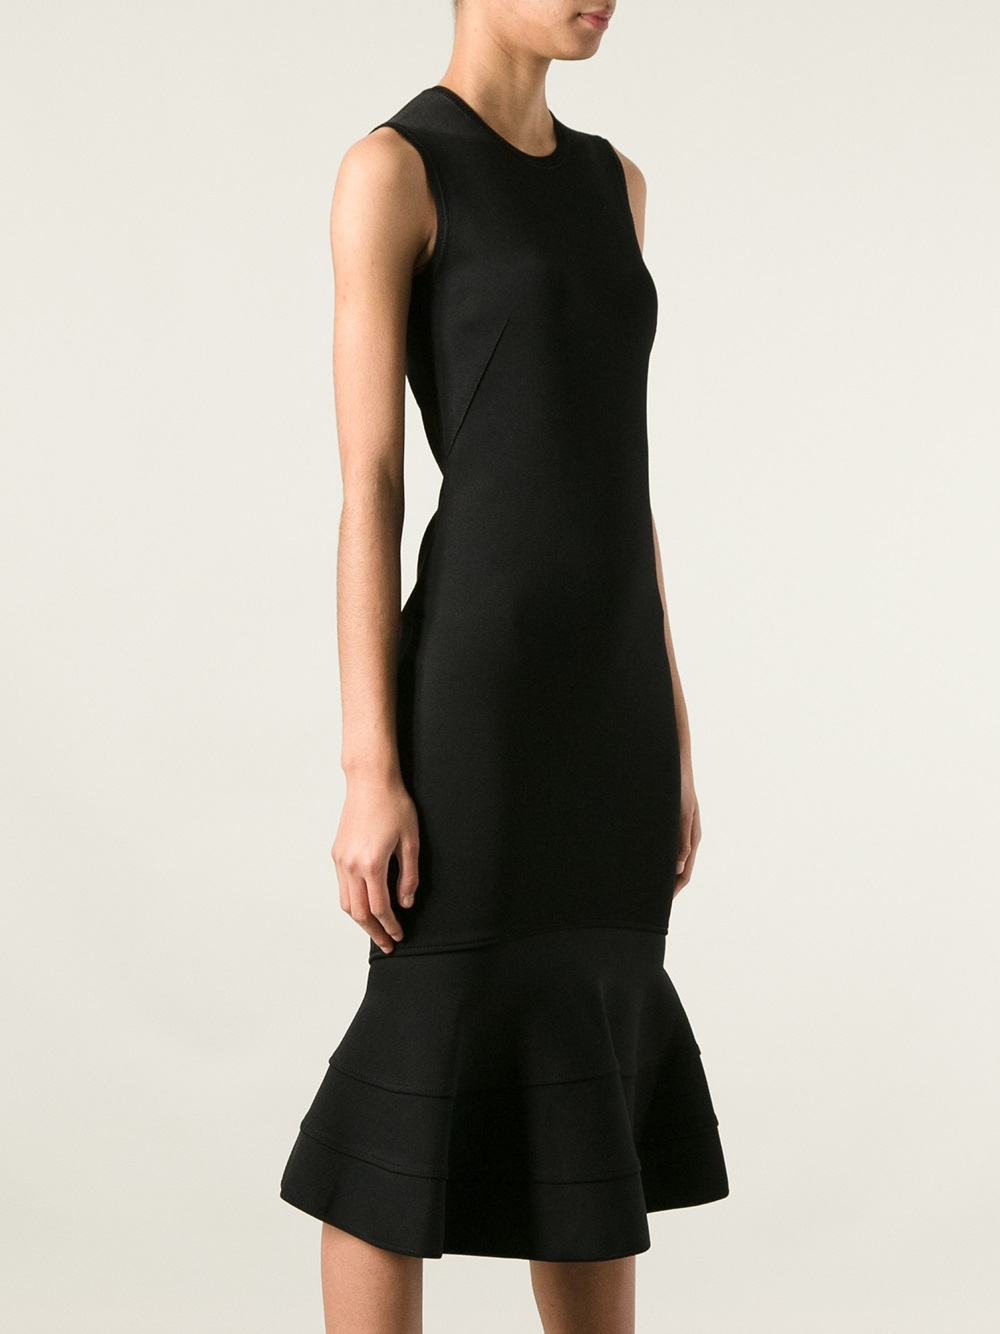 Givenchy Fitted Peplum Hem Dress in Black - Lyst